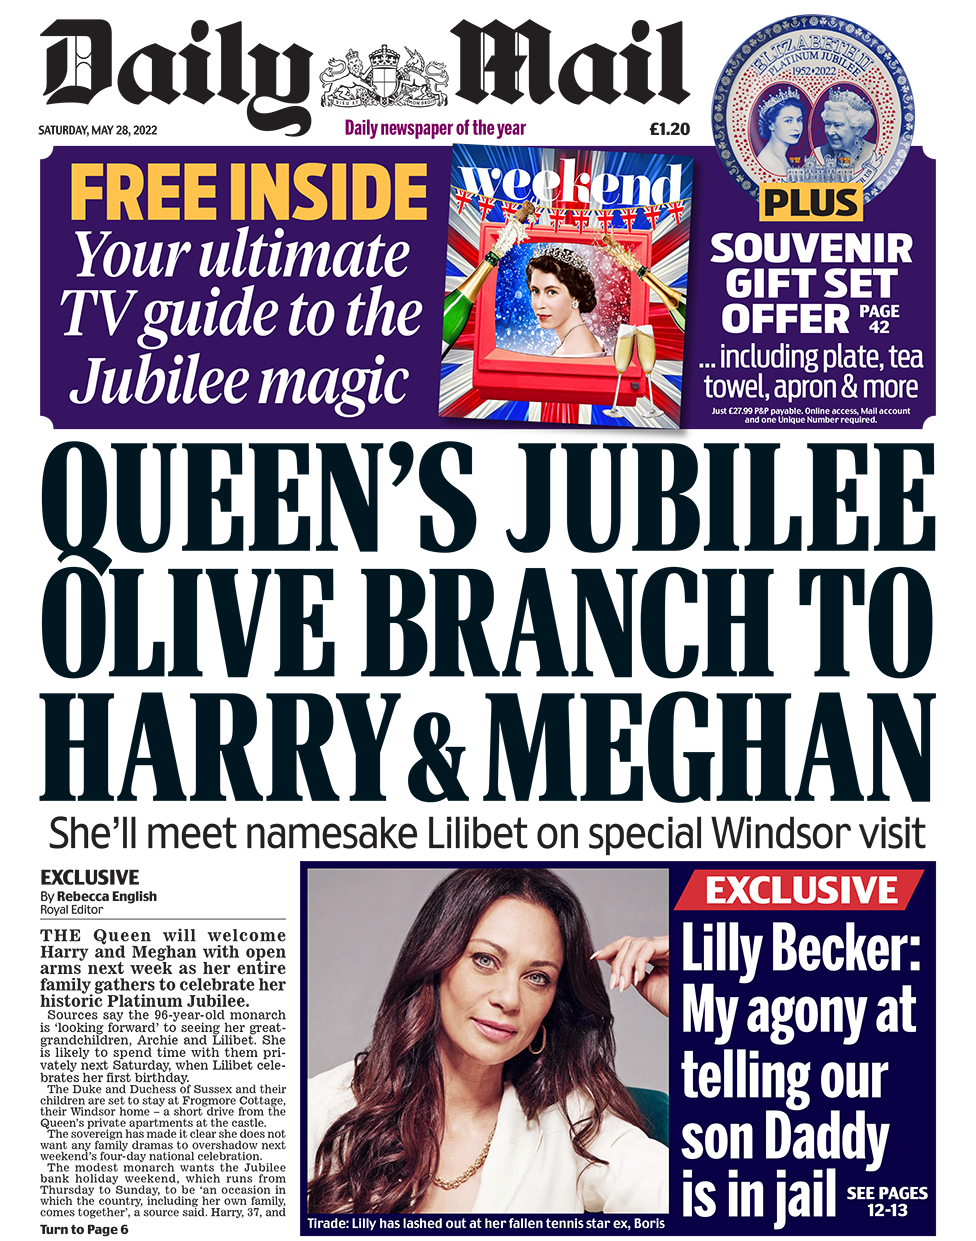 The headline in the Mail reads: "Queen's jubilee olive branch to Harry & Meghan".